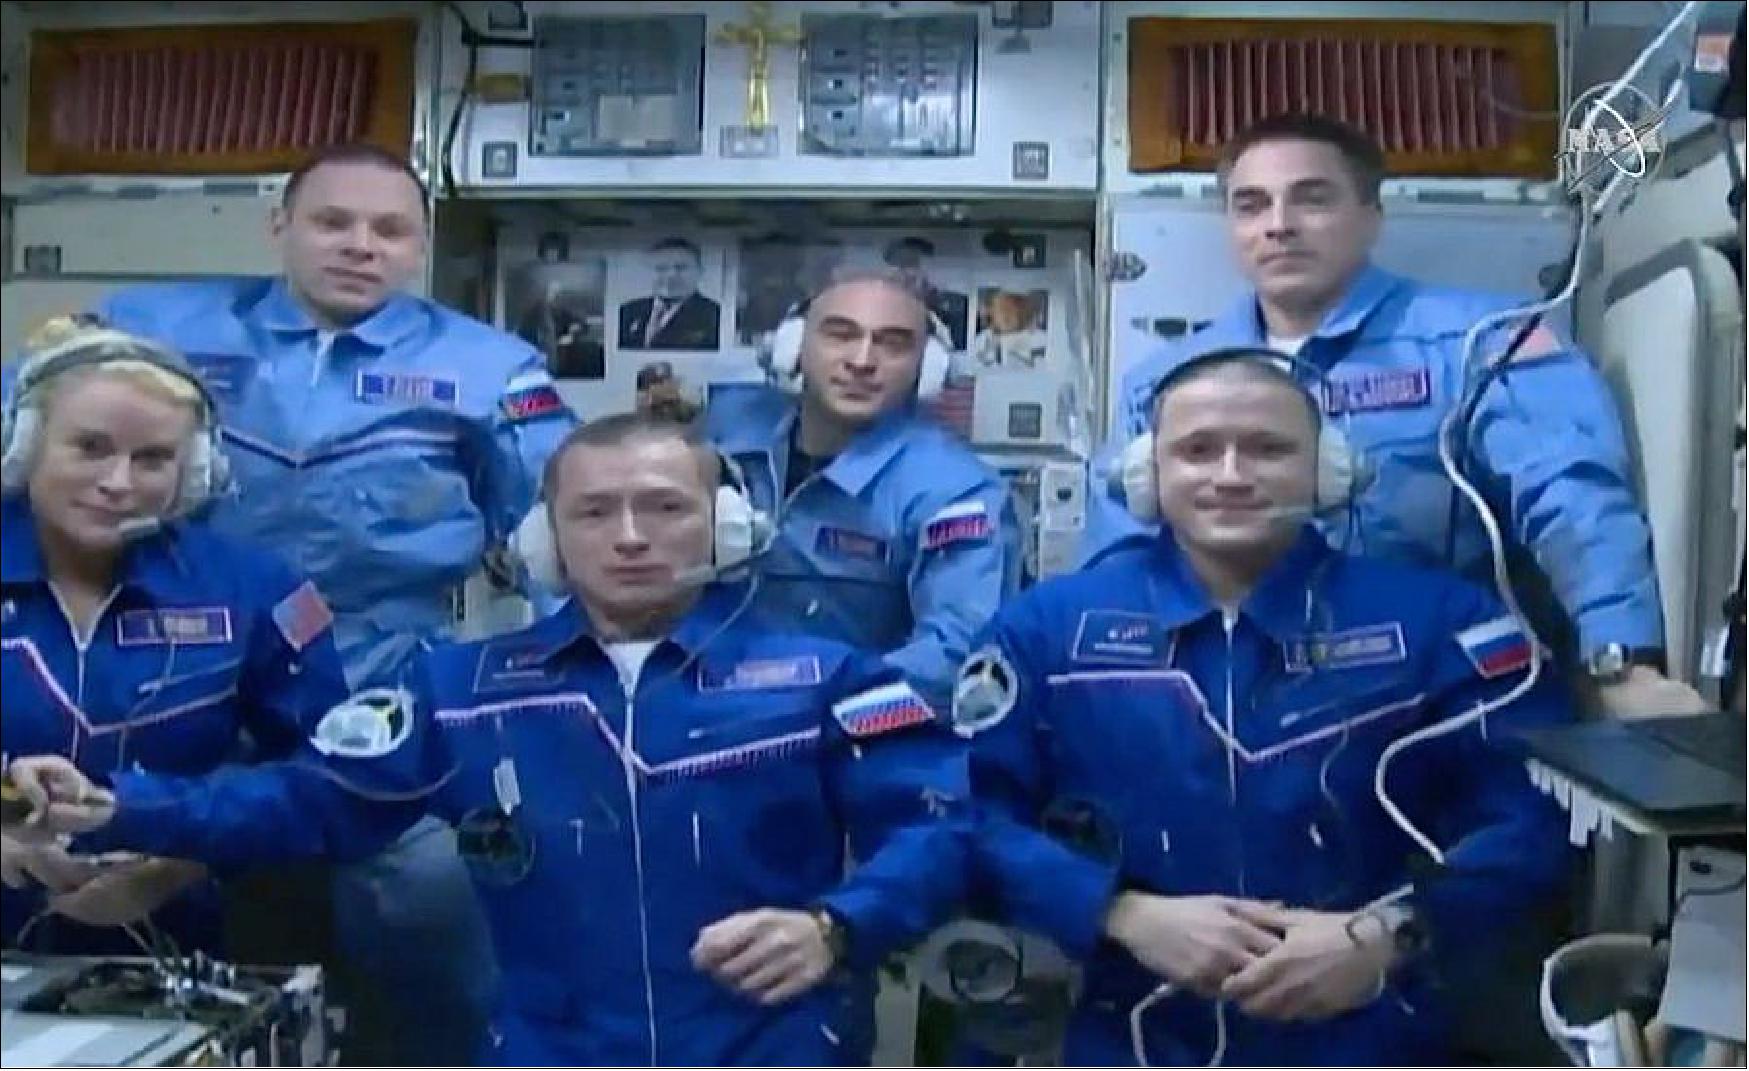 Figure 36: NASA astronaut Kate Rubins, Soyuz commander Sergey Ryzhikov, and flight engineer Sergey Kud-Sverchkov have joined the International Space Station crew after docking a few hours ago. Front row from left: Expedition 64 crew members Kate Rubins, Sergey Ryzhikov and Sergey Kud-Sverchkov join Expedition 63 crew members (back row from left) Ivan Vagner, Anatoly Ivanishin and Chris Cassidy inside the space station’s Zvezda service module (image credit: NASA TV)